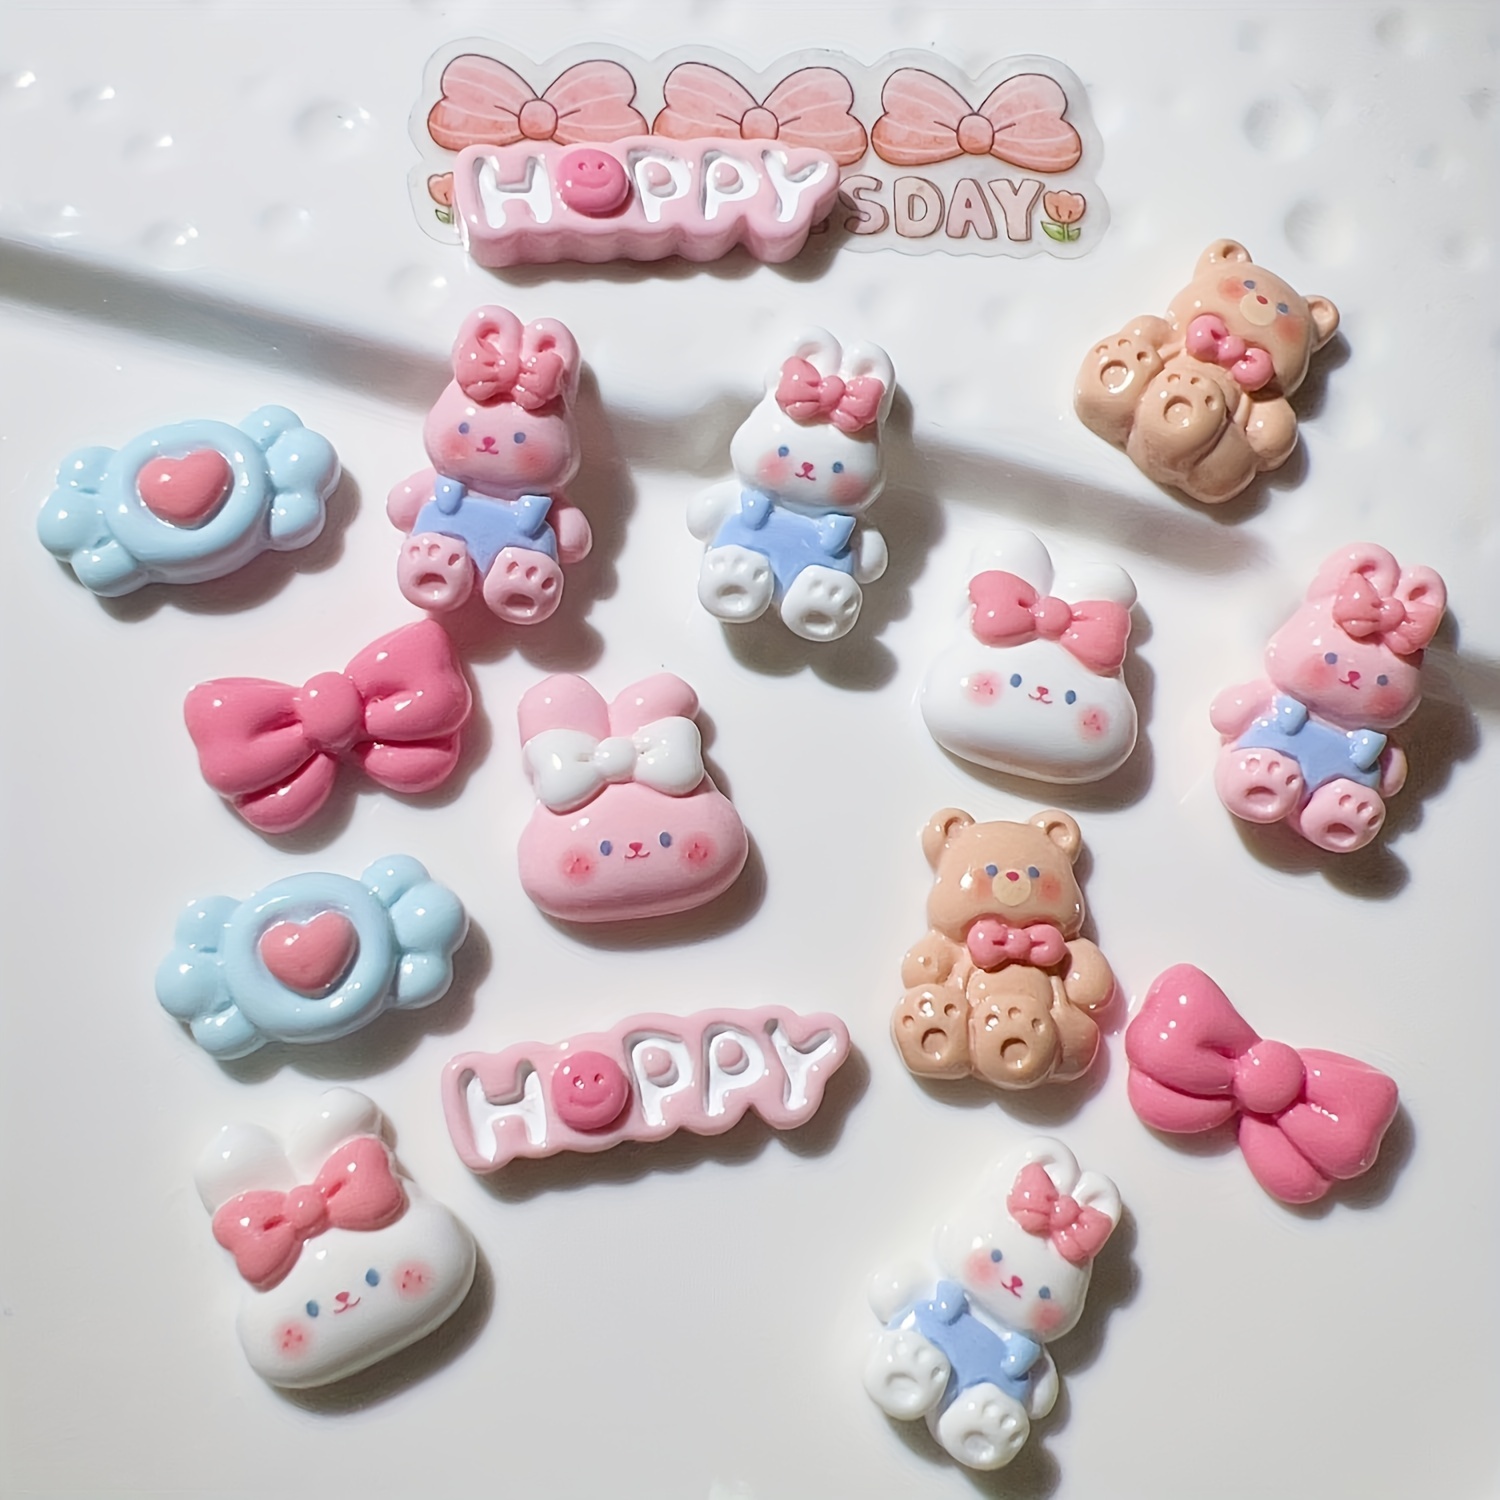 10PCS Candy Resin Charms For Jewelry Making Cute Kawaii Food Fruit